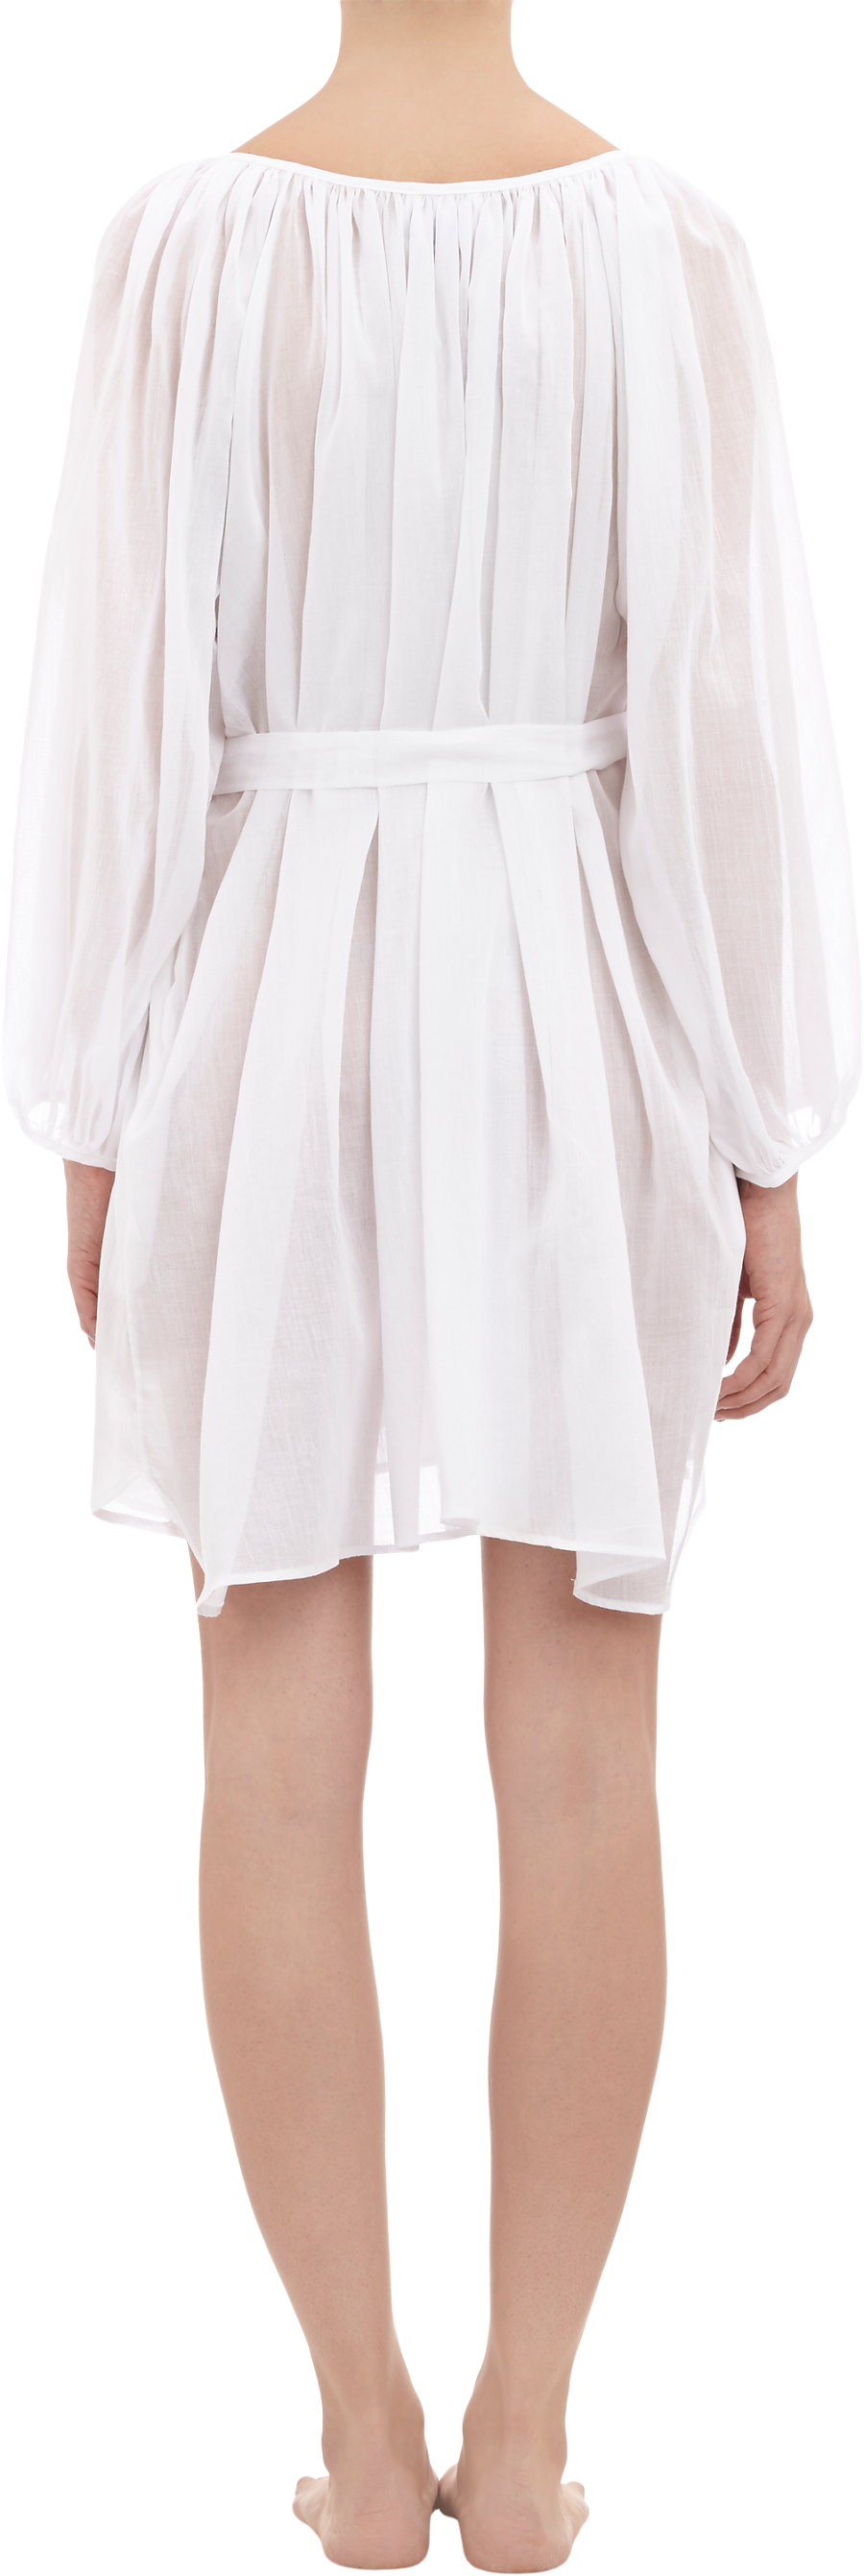 Loup Charmant Peasant Tunic in White | Lyst